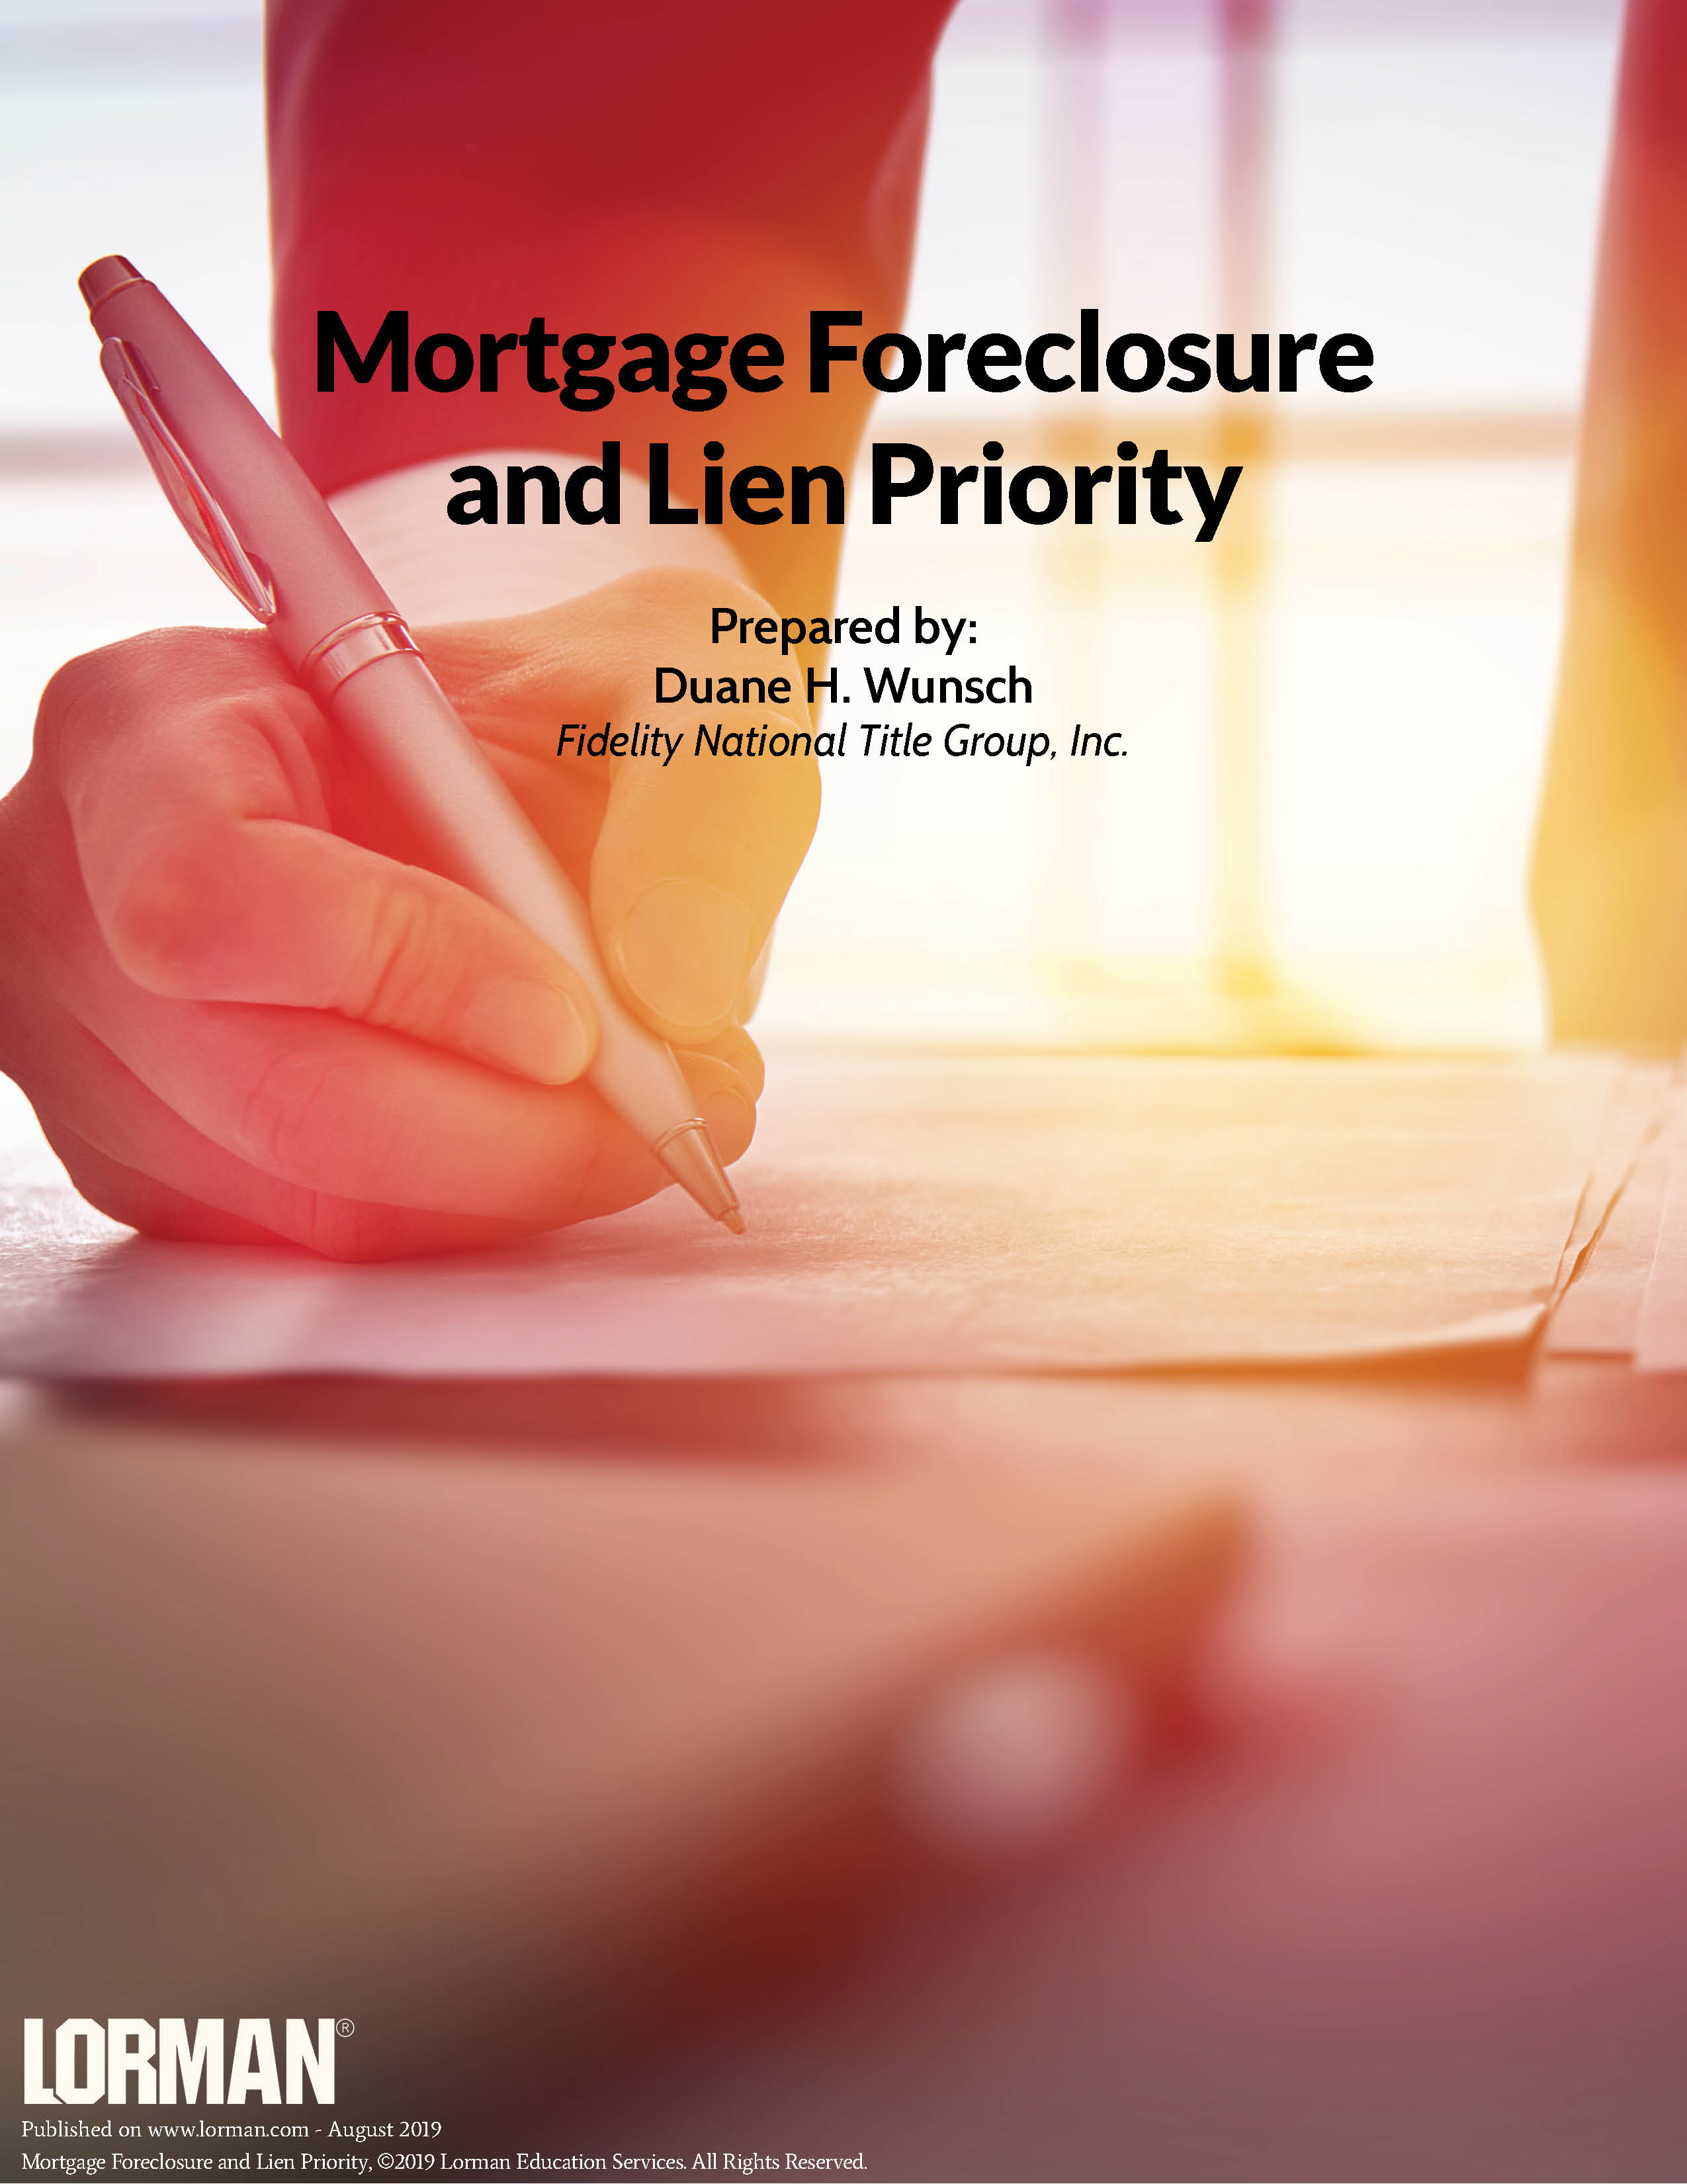 Mortgage Foreclosure and Lien Priority